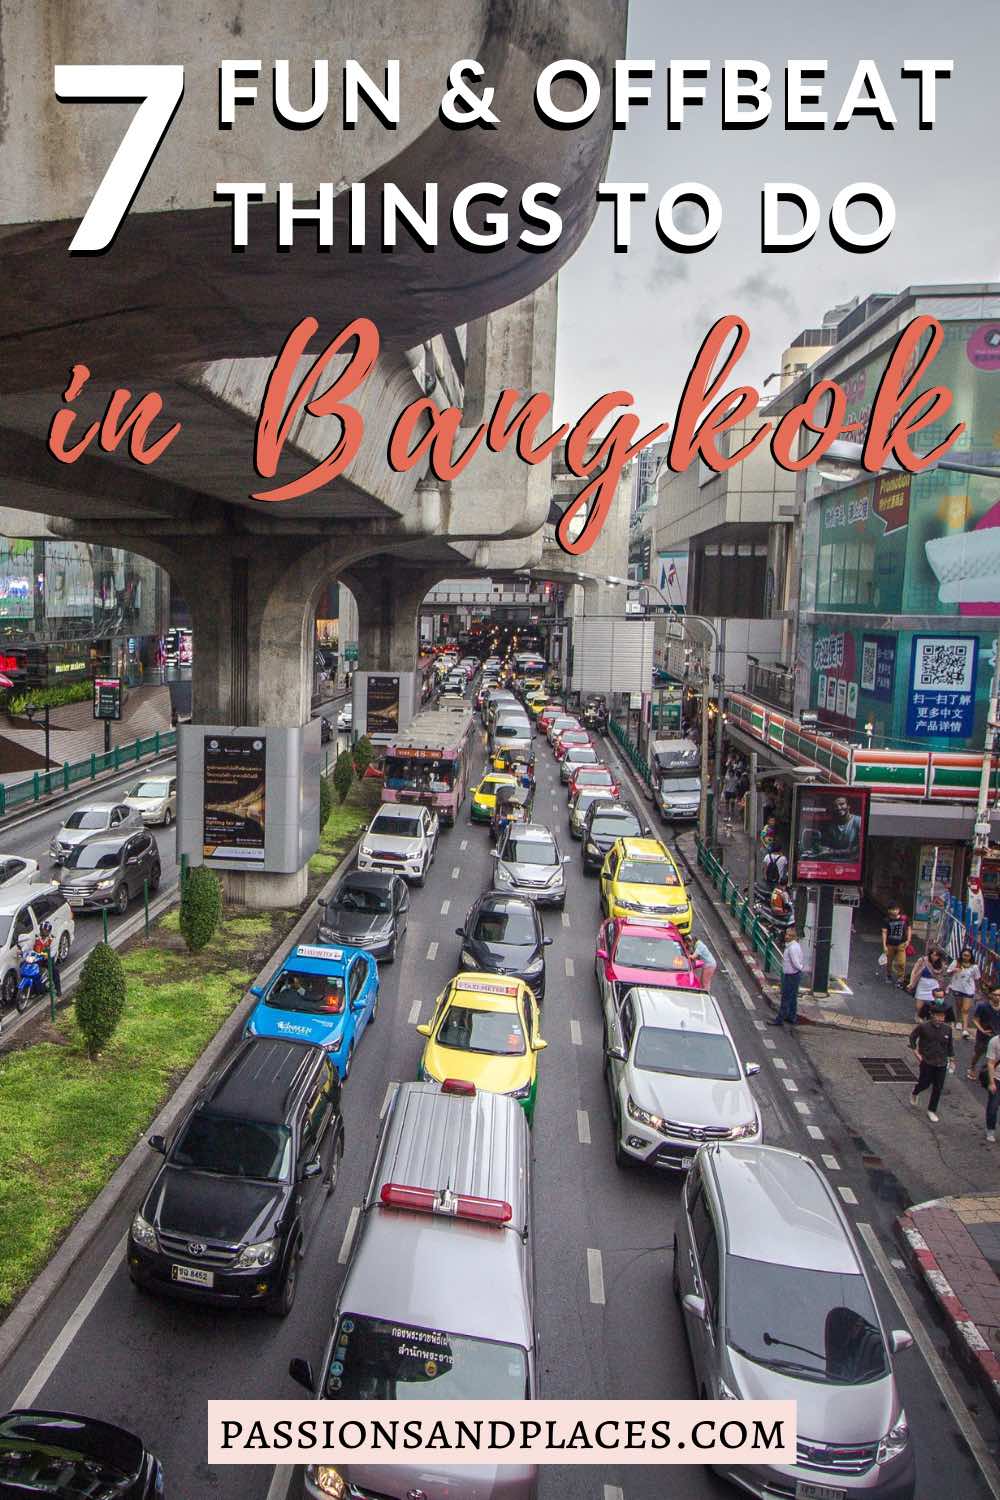 The top Bangkok attractions have been listed a million times - but what if you want to experience Bangkok off the beaten path? If you’ve already seen the city’s must-do sights, head to one of the spots on this list during your next trip. From quirky museums to one-of-a-kind stores, these are some of the best non-touristy things to do in Bangkok. #Bangkok #Thailand #BKK